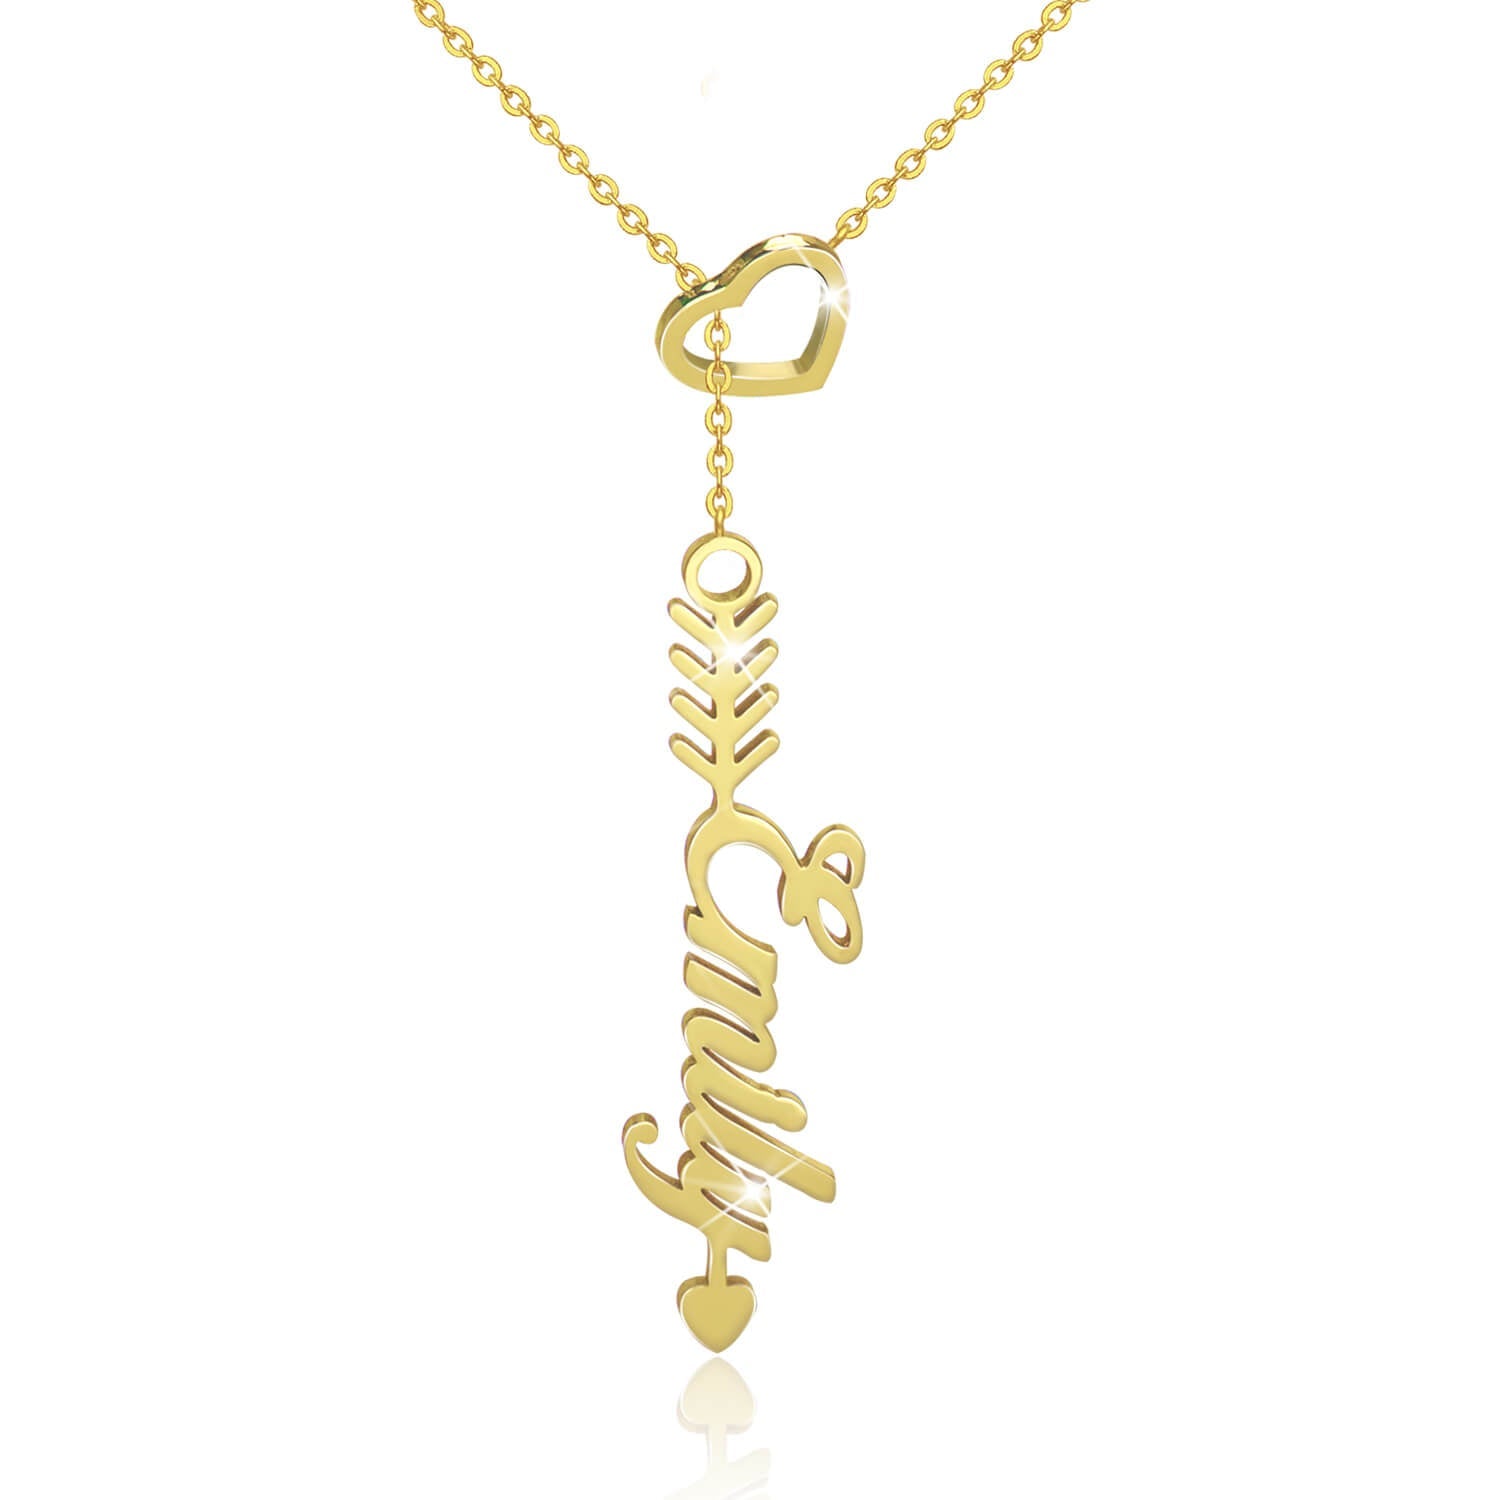 Gold Plated Shaped Heart Necklace With Name-silviax